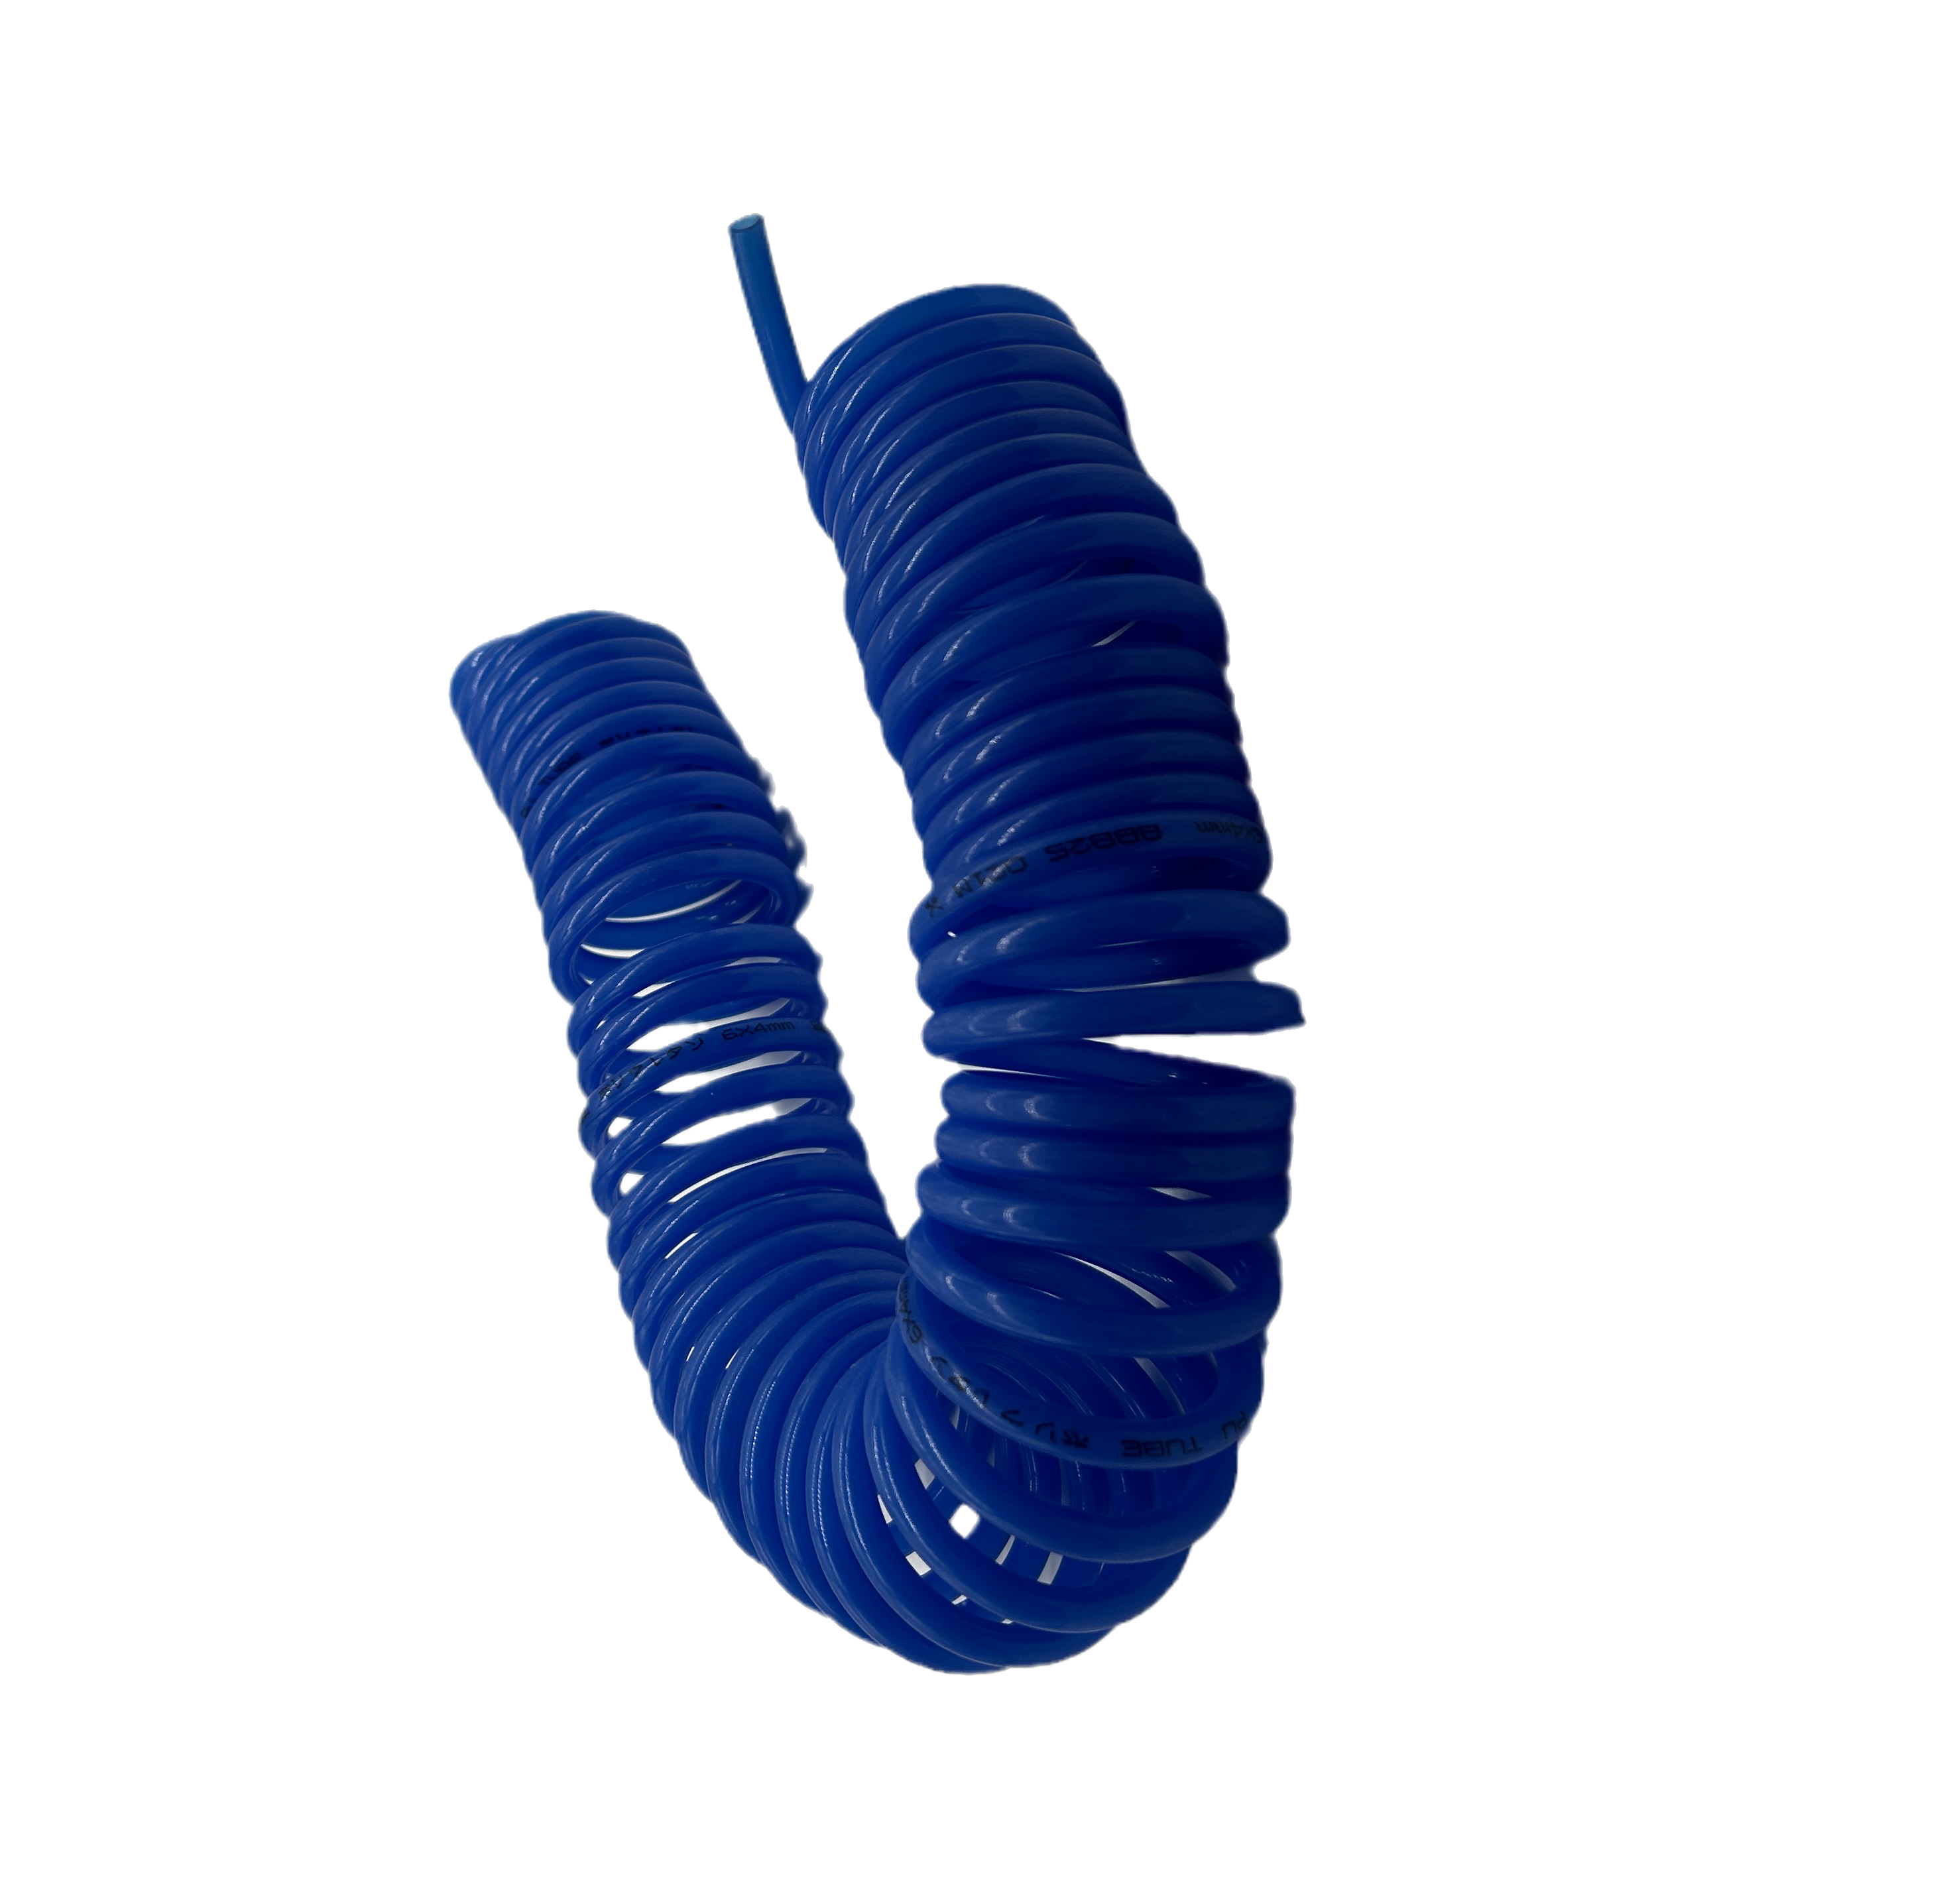 Pu tube blue spring tube with an outer diameter of 6mm-6 meters and no joints